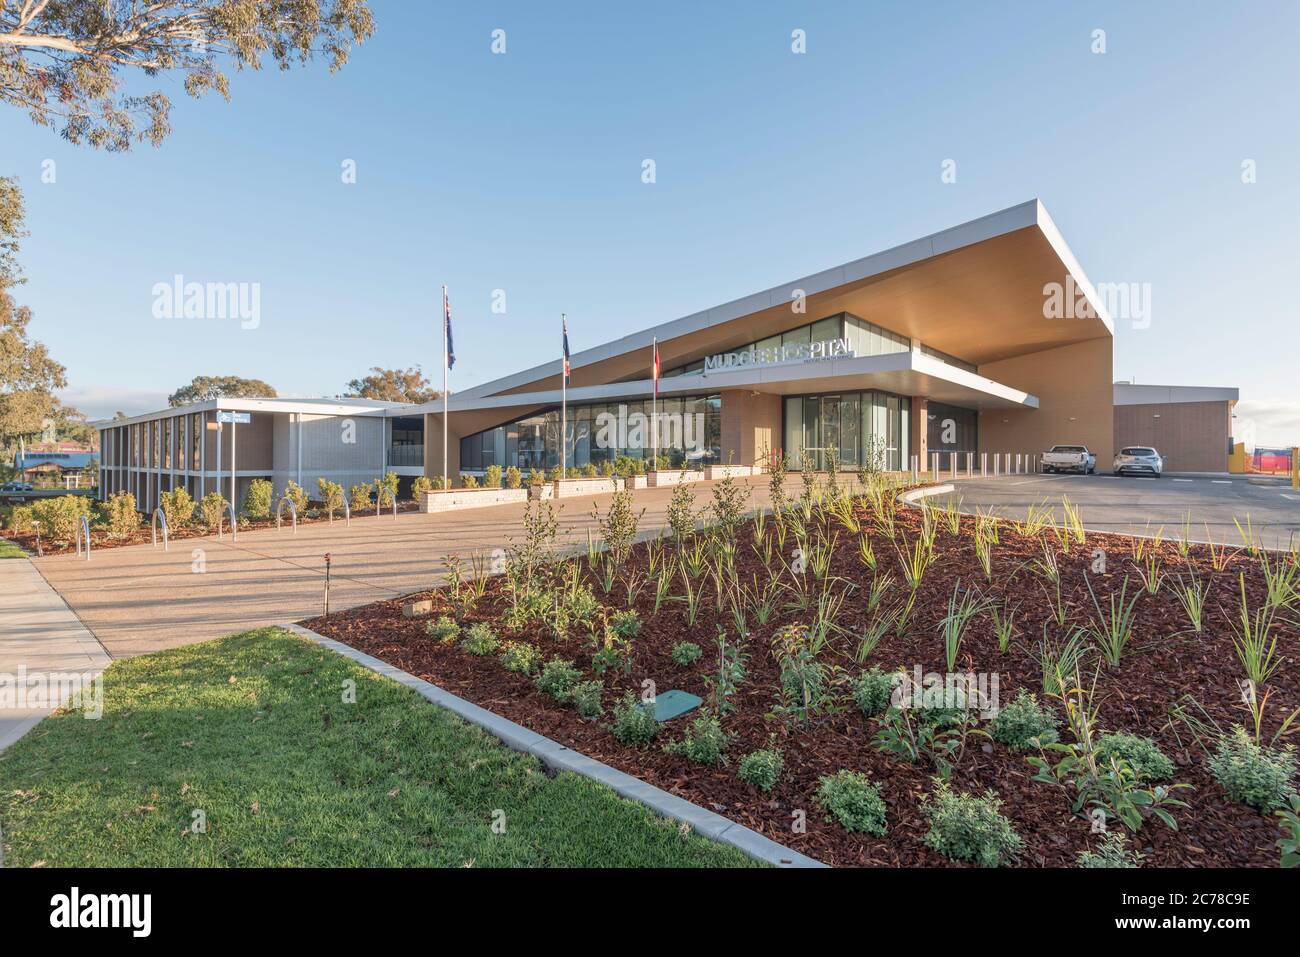 Mudgee, Australia, June 2020: The just opened $A70m redevelopment of the Mudgee (Regional) Hospital in mid western New South Wales, Australia Stock Photo